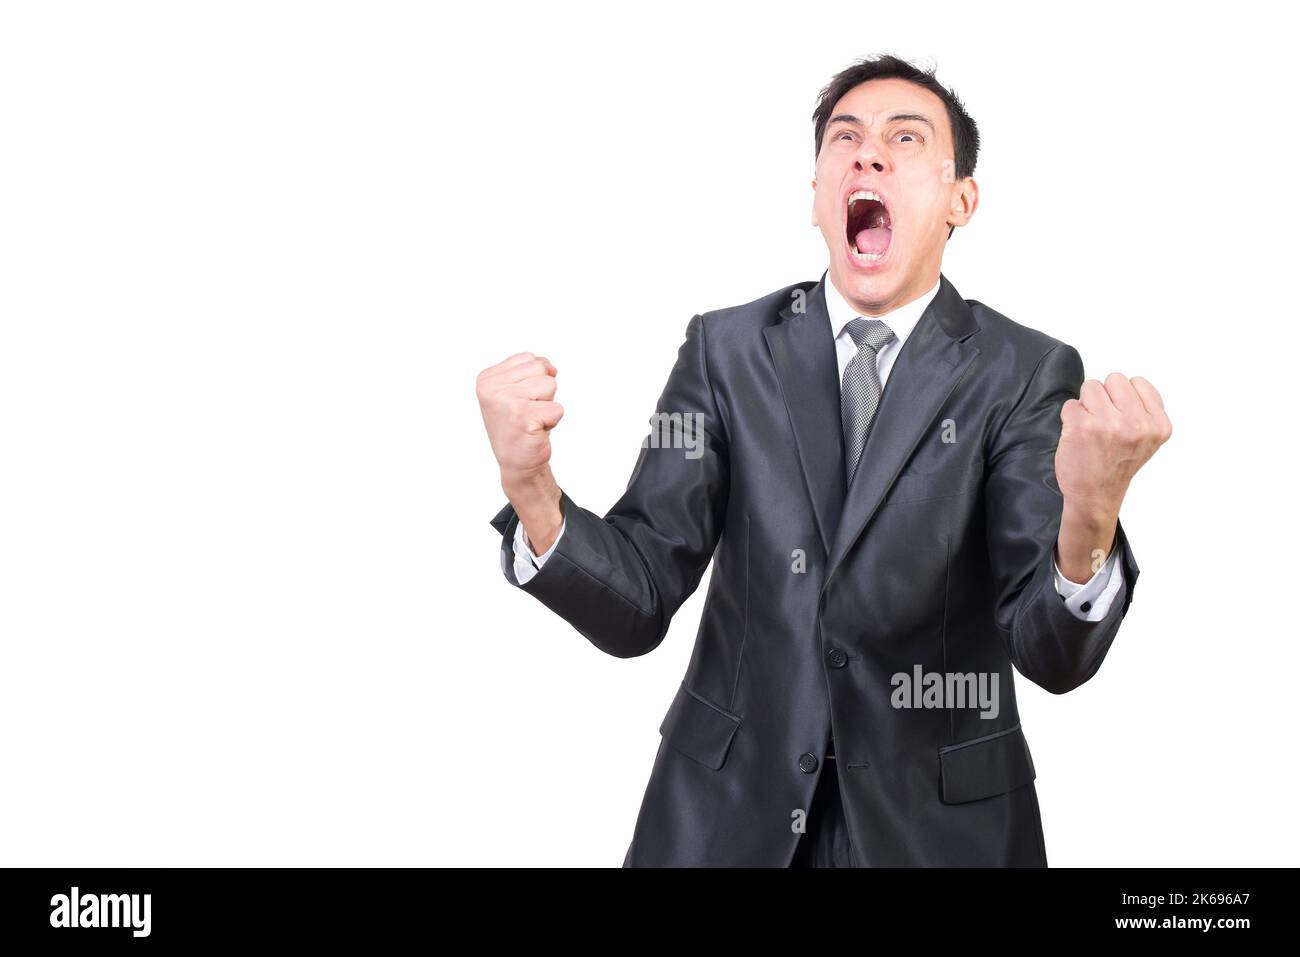 Hysterical man in formal suit shouting in studio Stock Photo